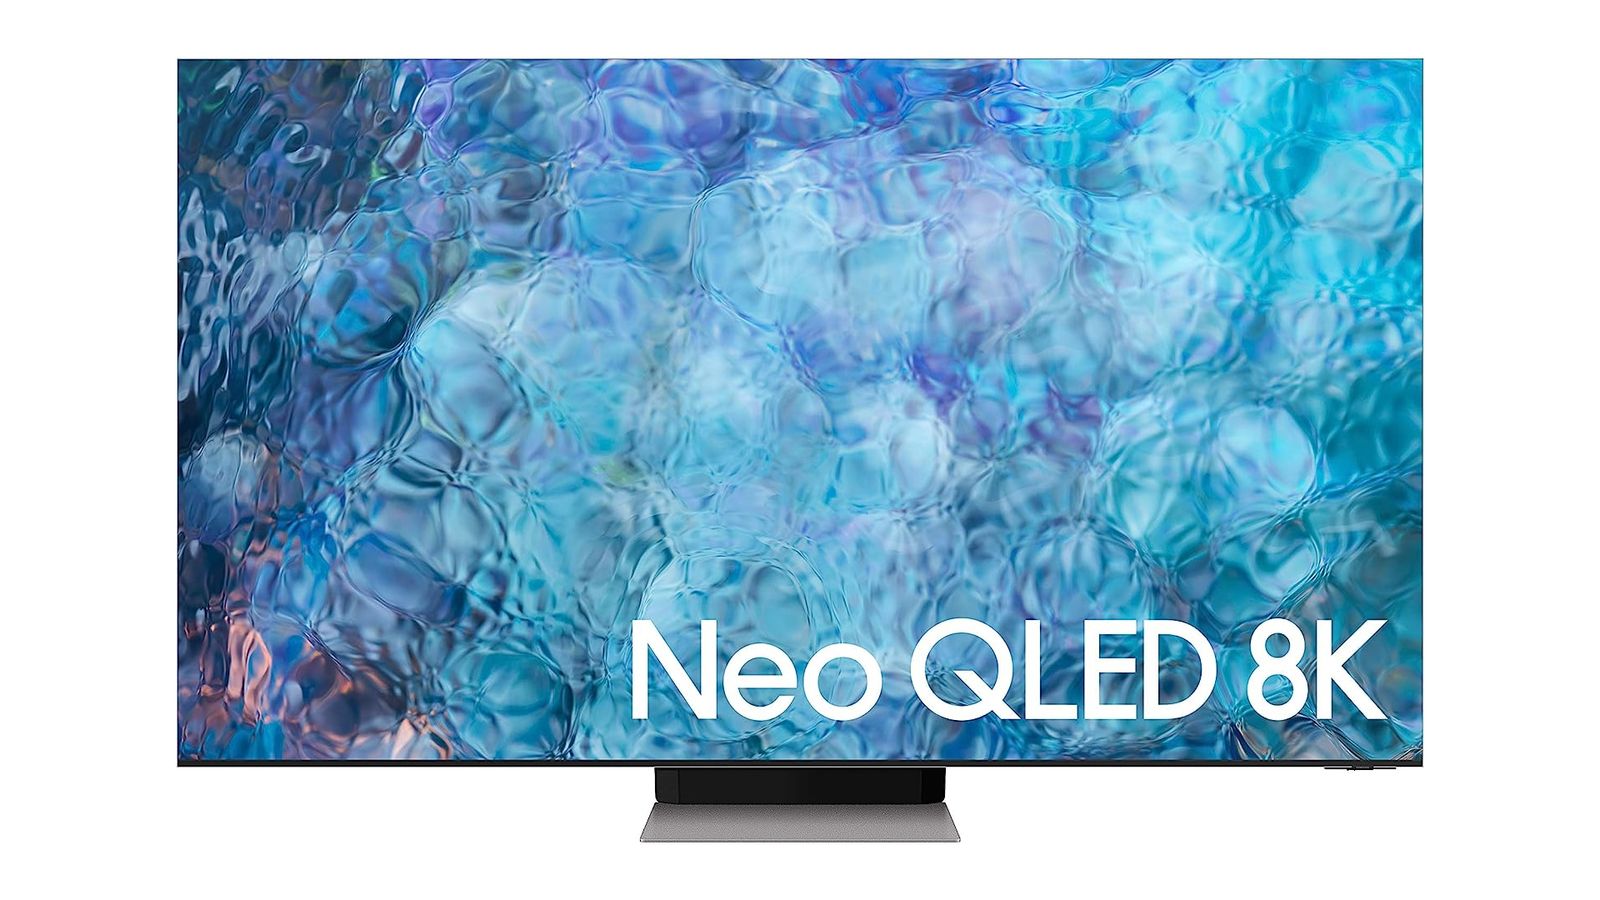 Samsung QN900A product image of a dark grey flatscreen TV with a blue and purple watery pattern on the display.